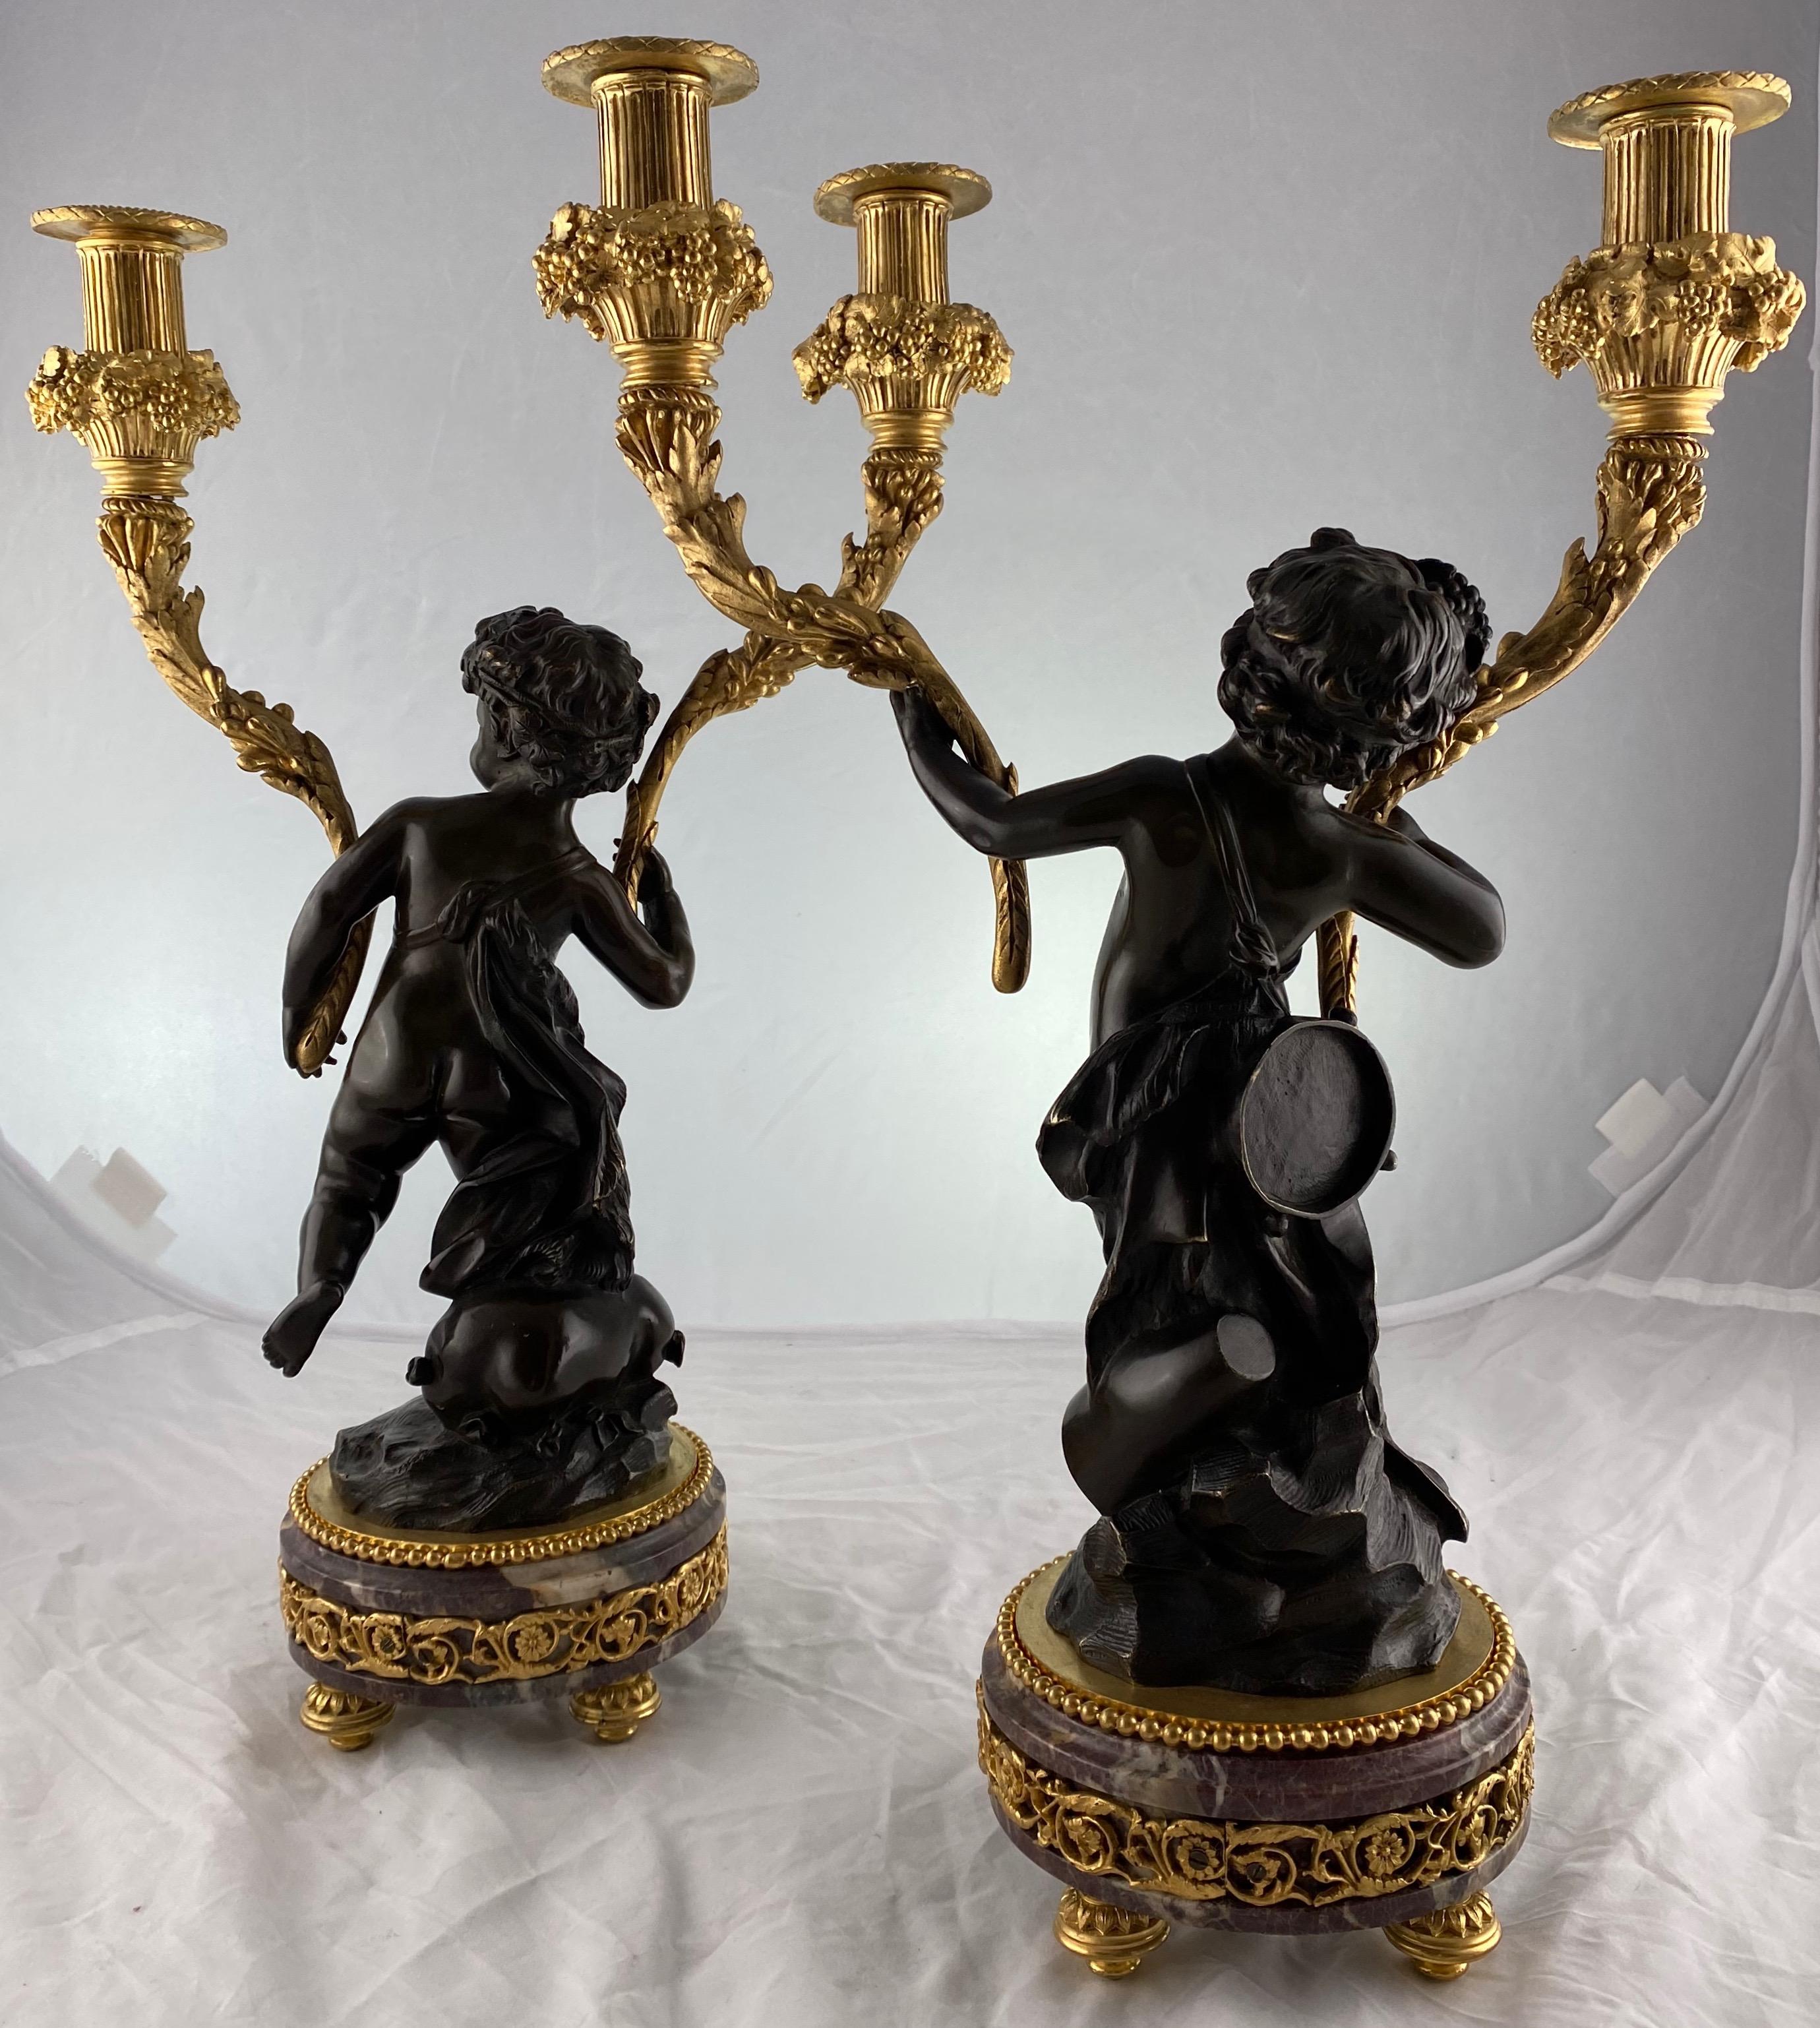 Louis XVI Pair of French Candelabra, Late 18th C